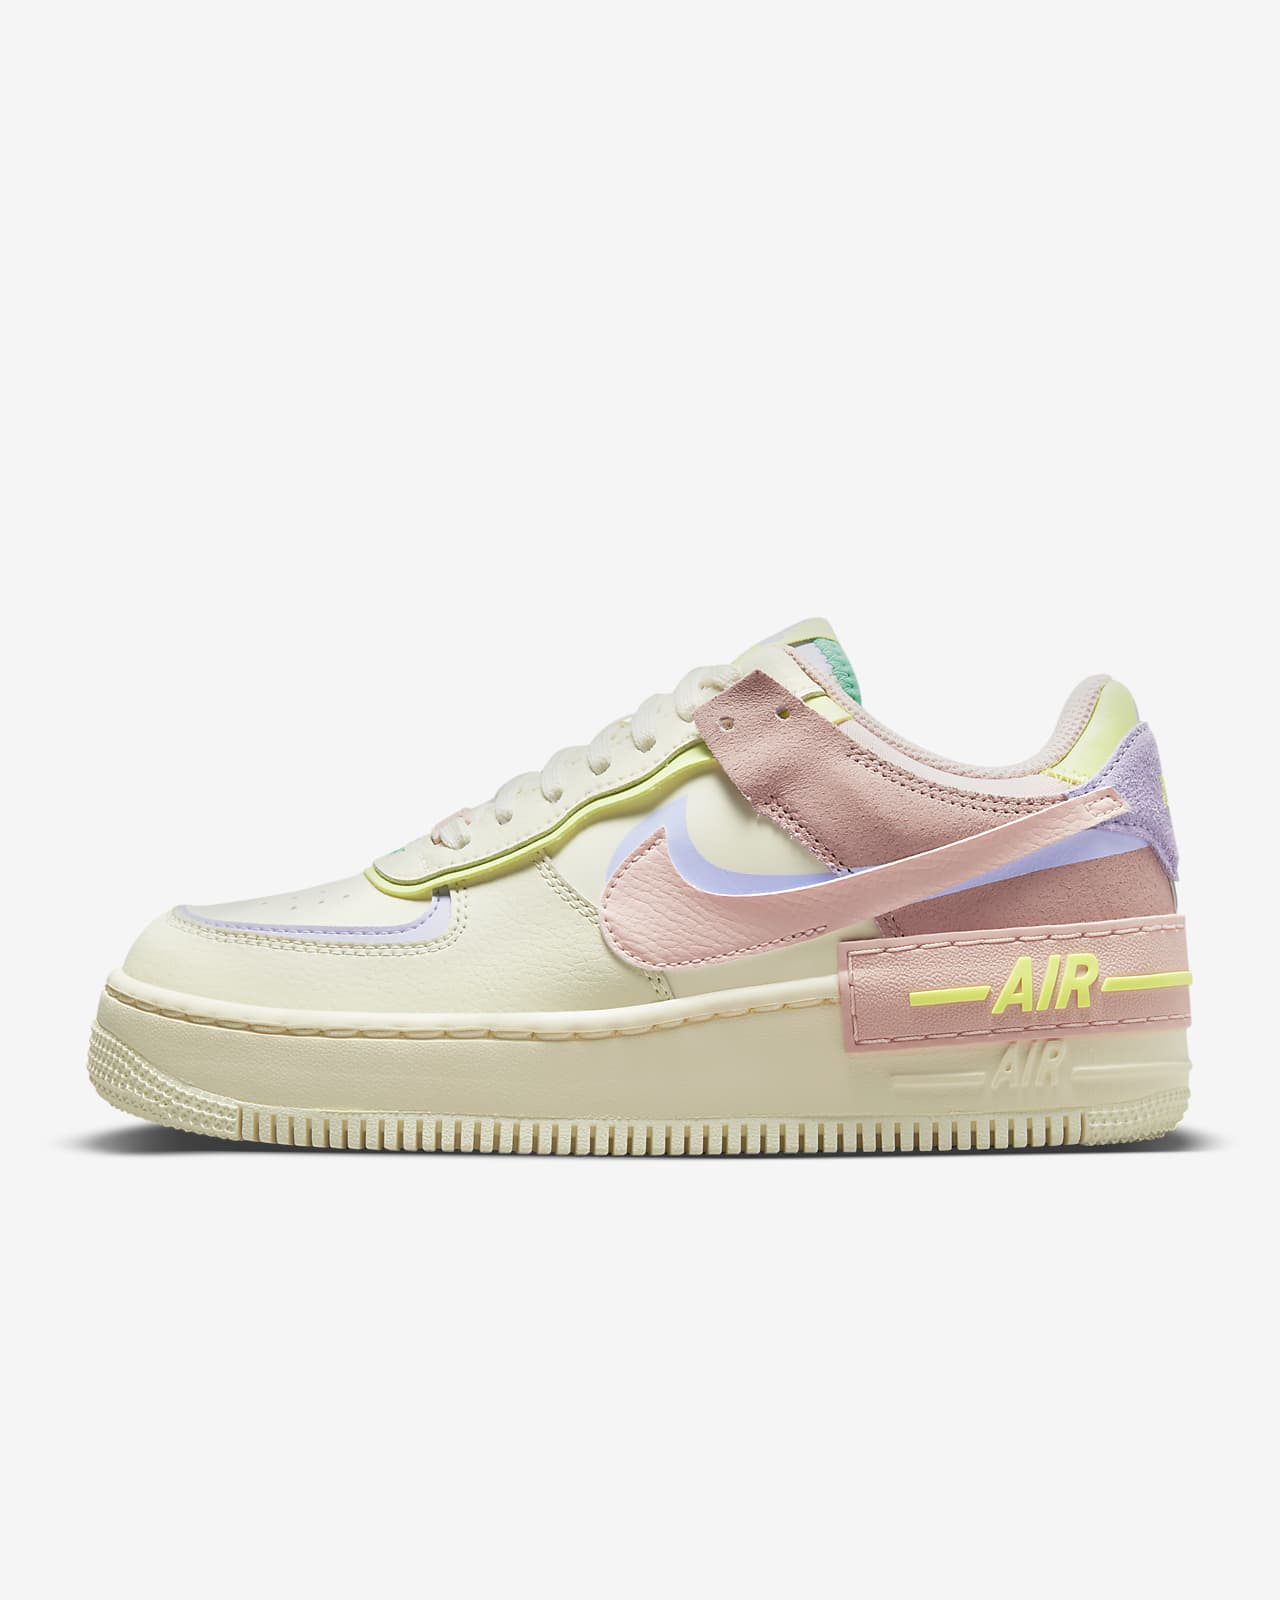 Chaussure Nike Air Force 1 Shadow pour Femme